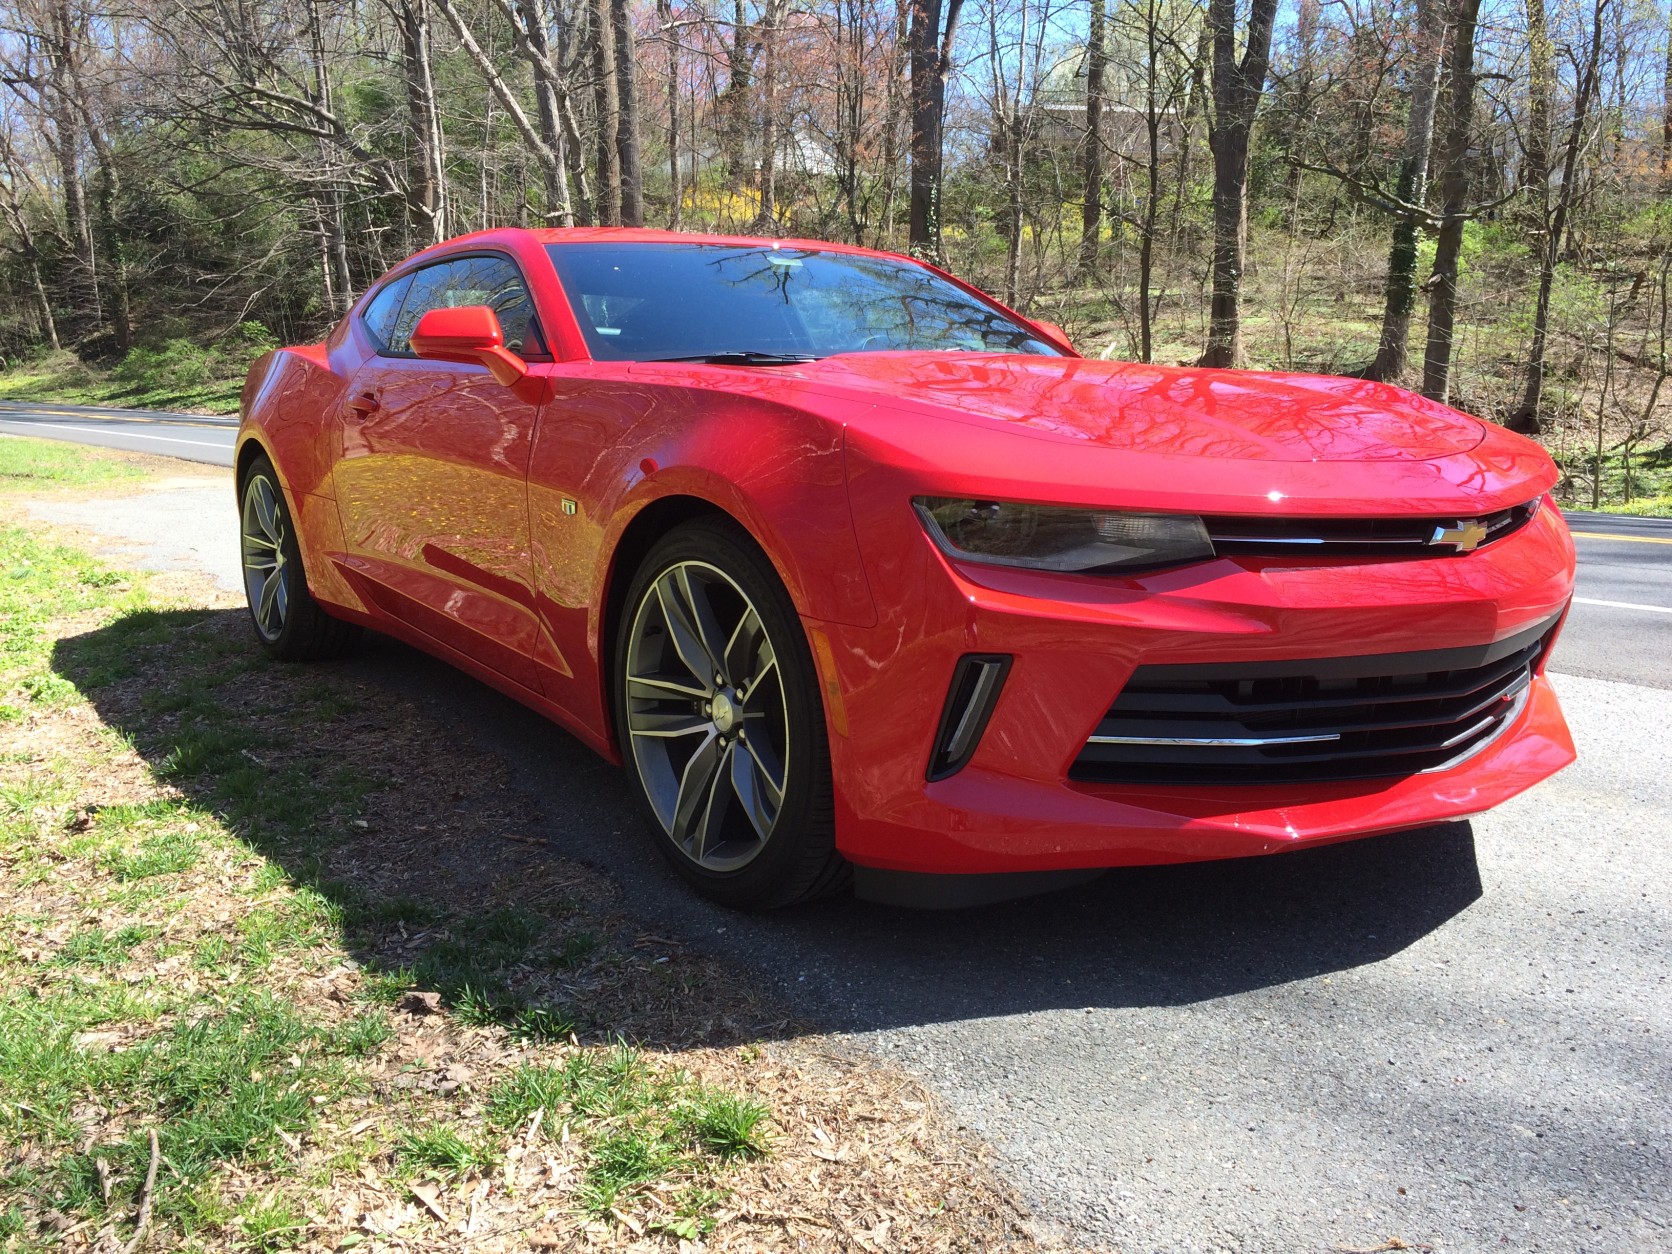 For 2016, the Camaro has been made over inside and out. What you can’t see adds to the driving pleasure: a lighter weight and slightly smaller dimensions. (WTOP/Mike Parris)